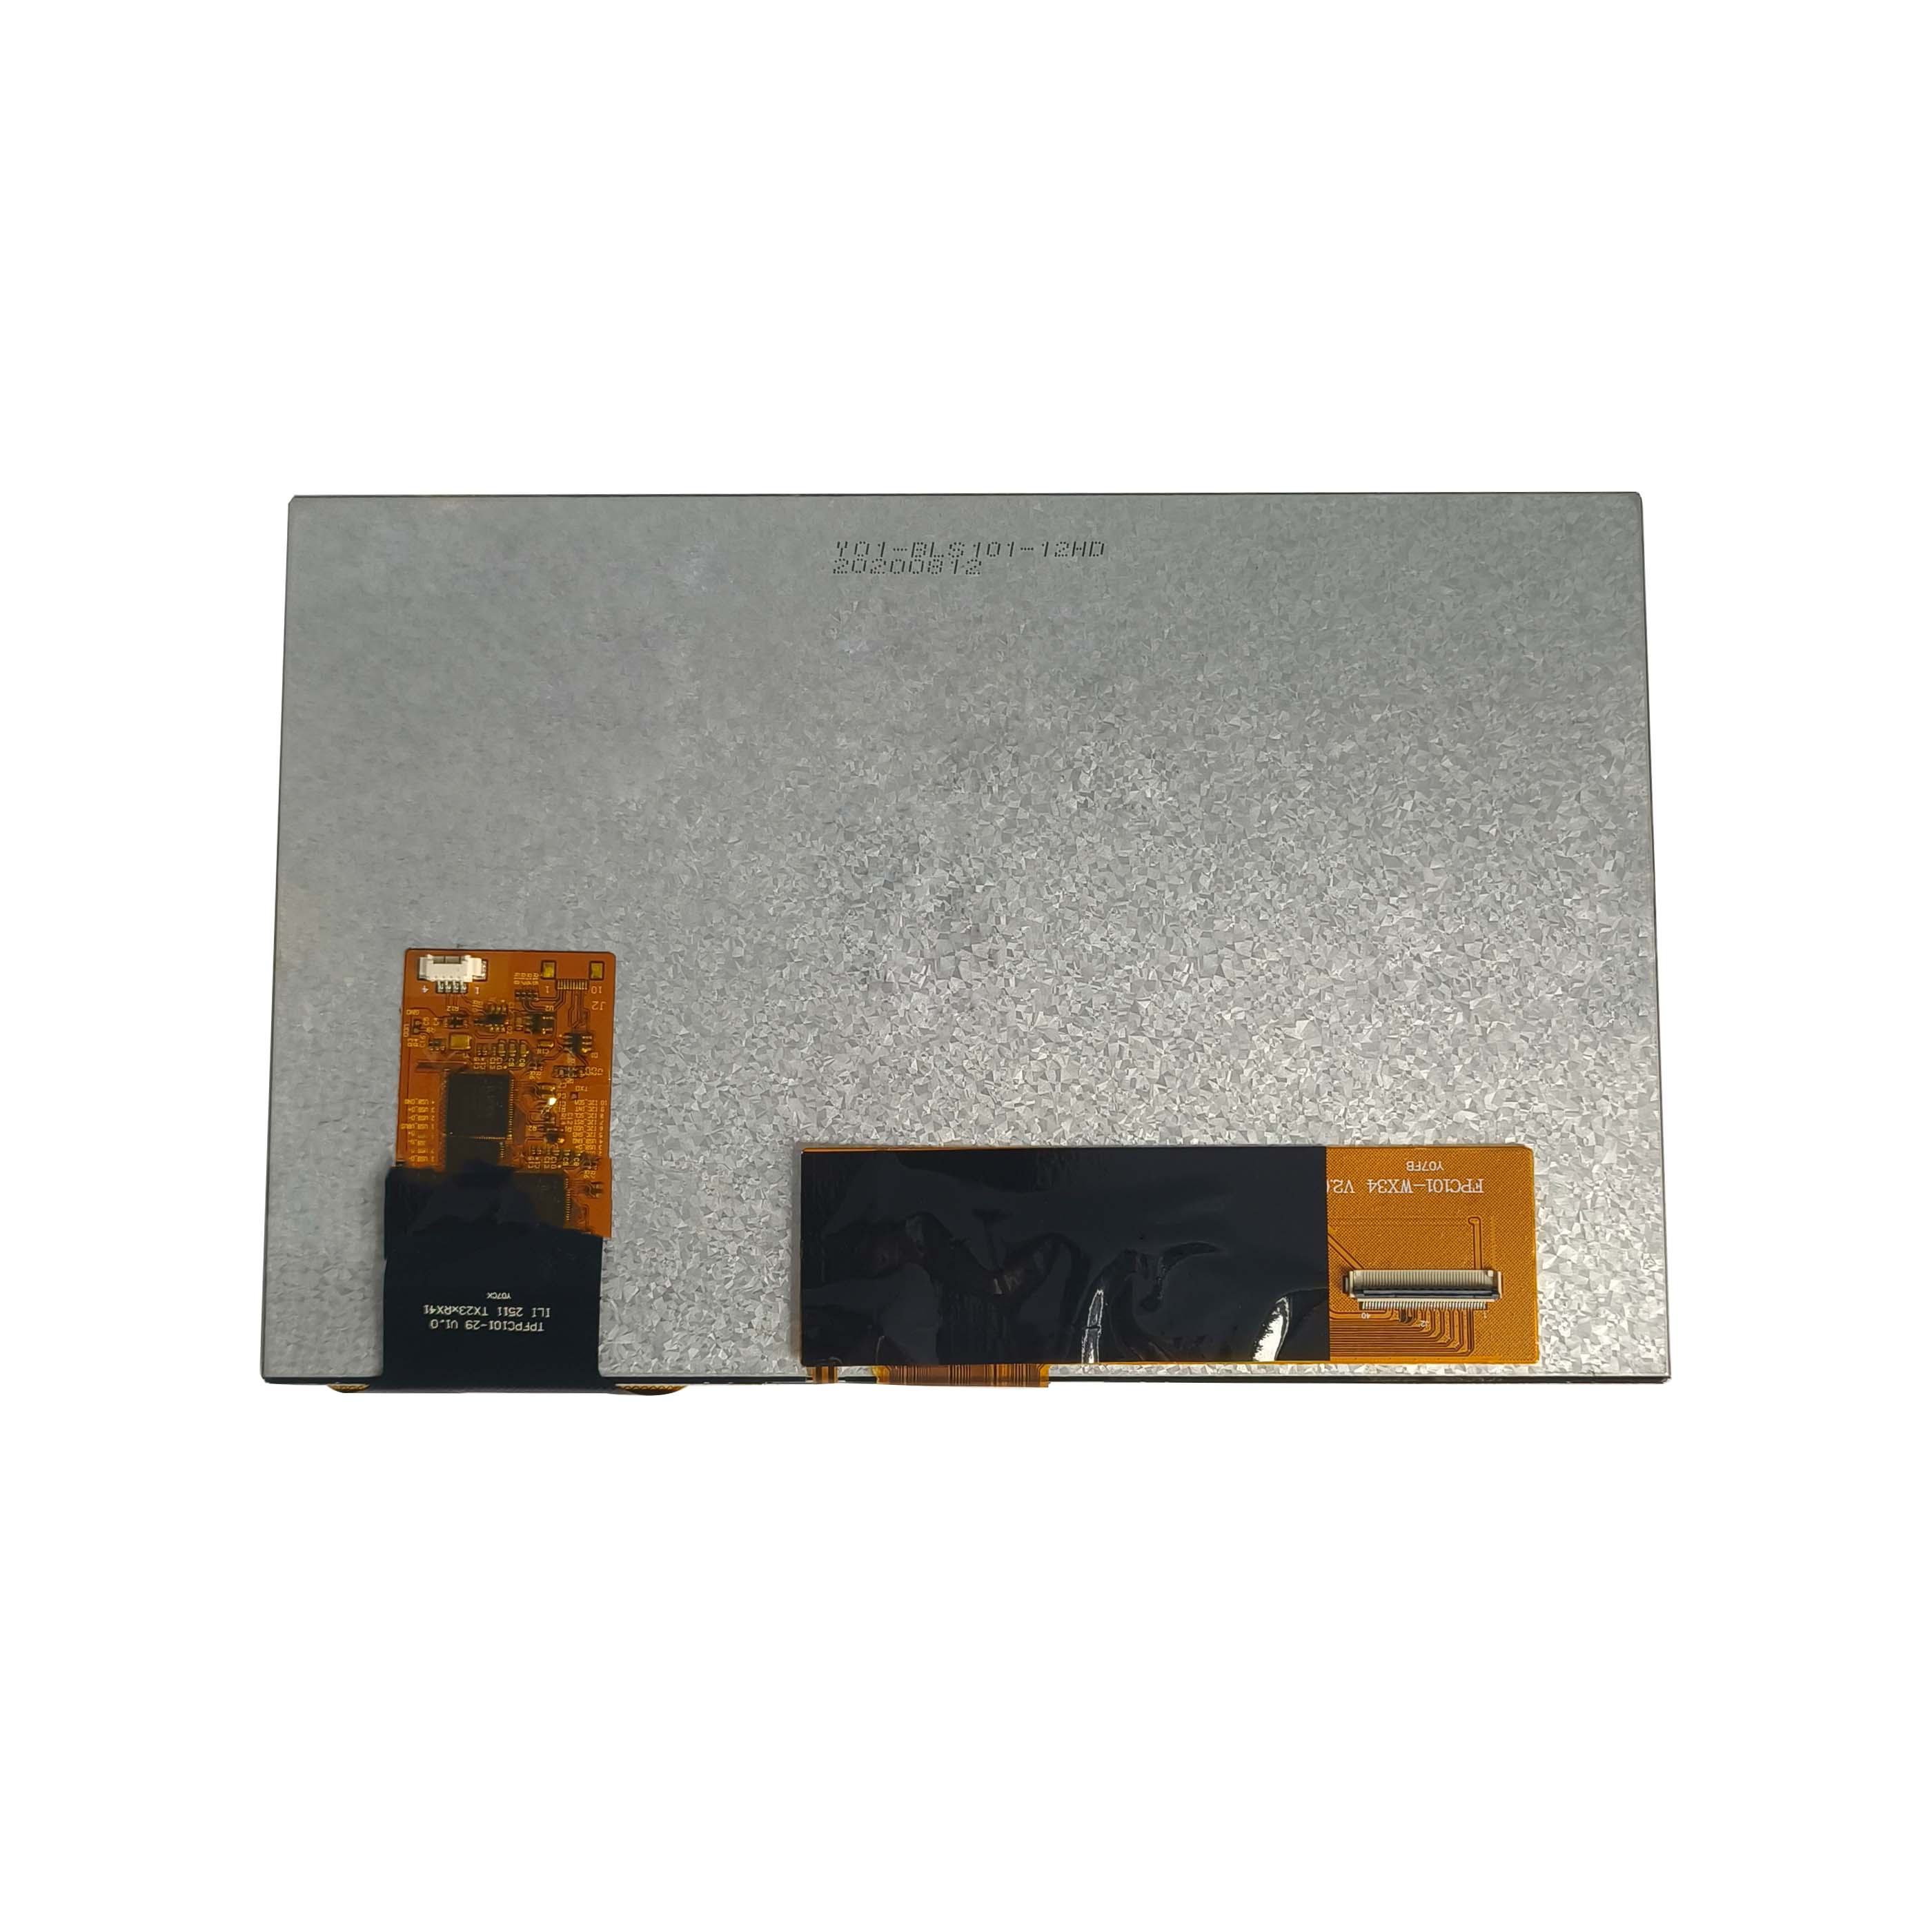 10.1inch 1280x800 IPS TFT LCD Touch Screen With LVDS Interface